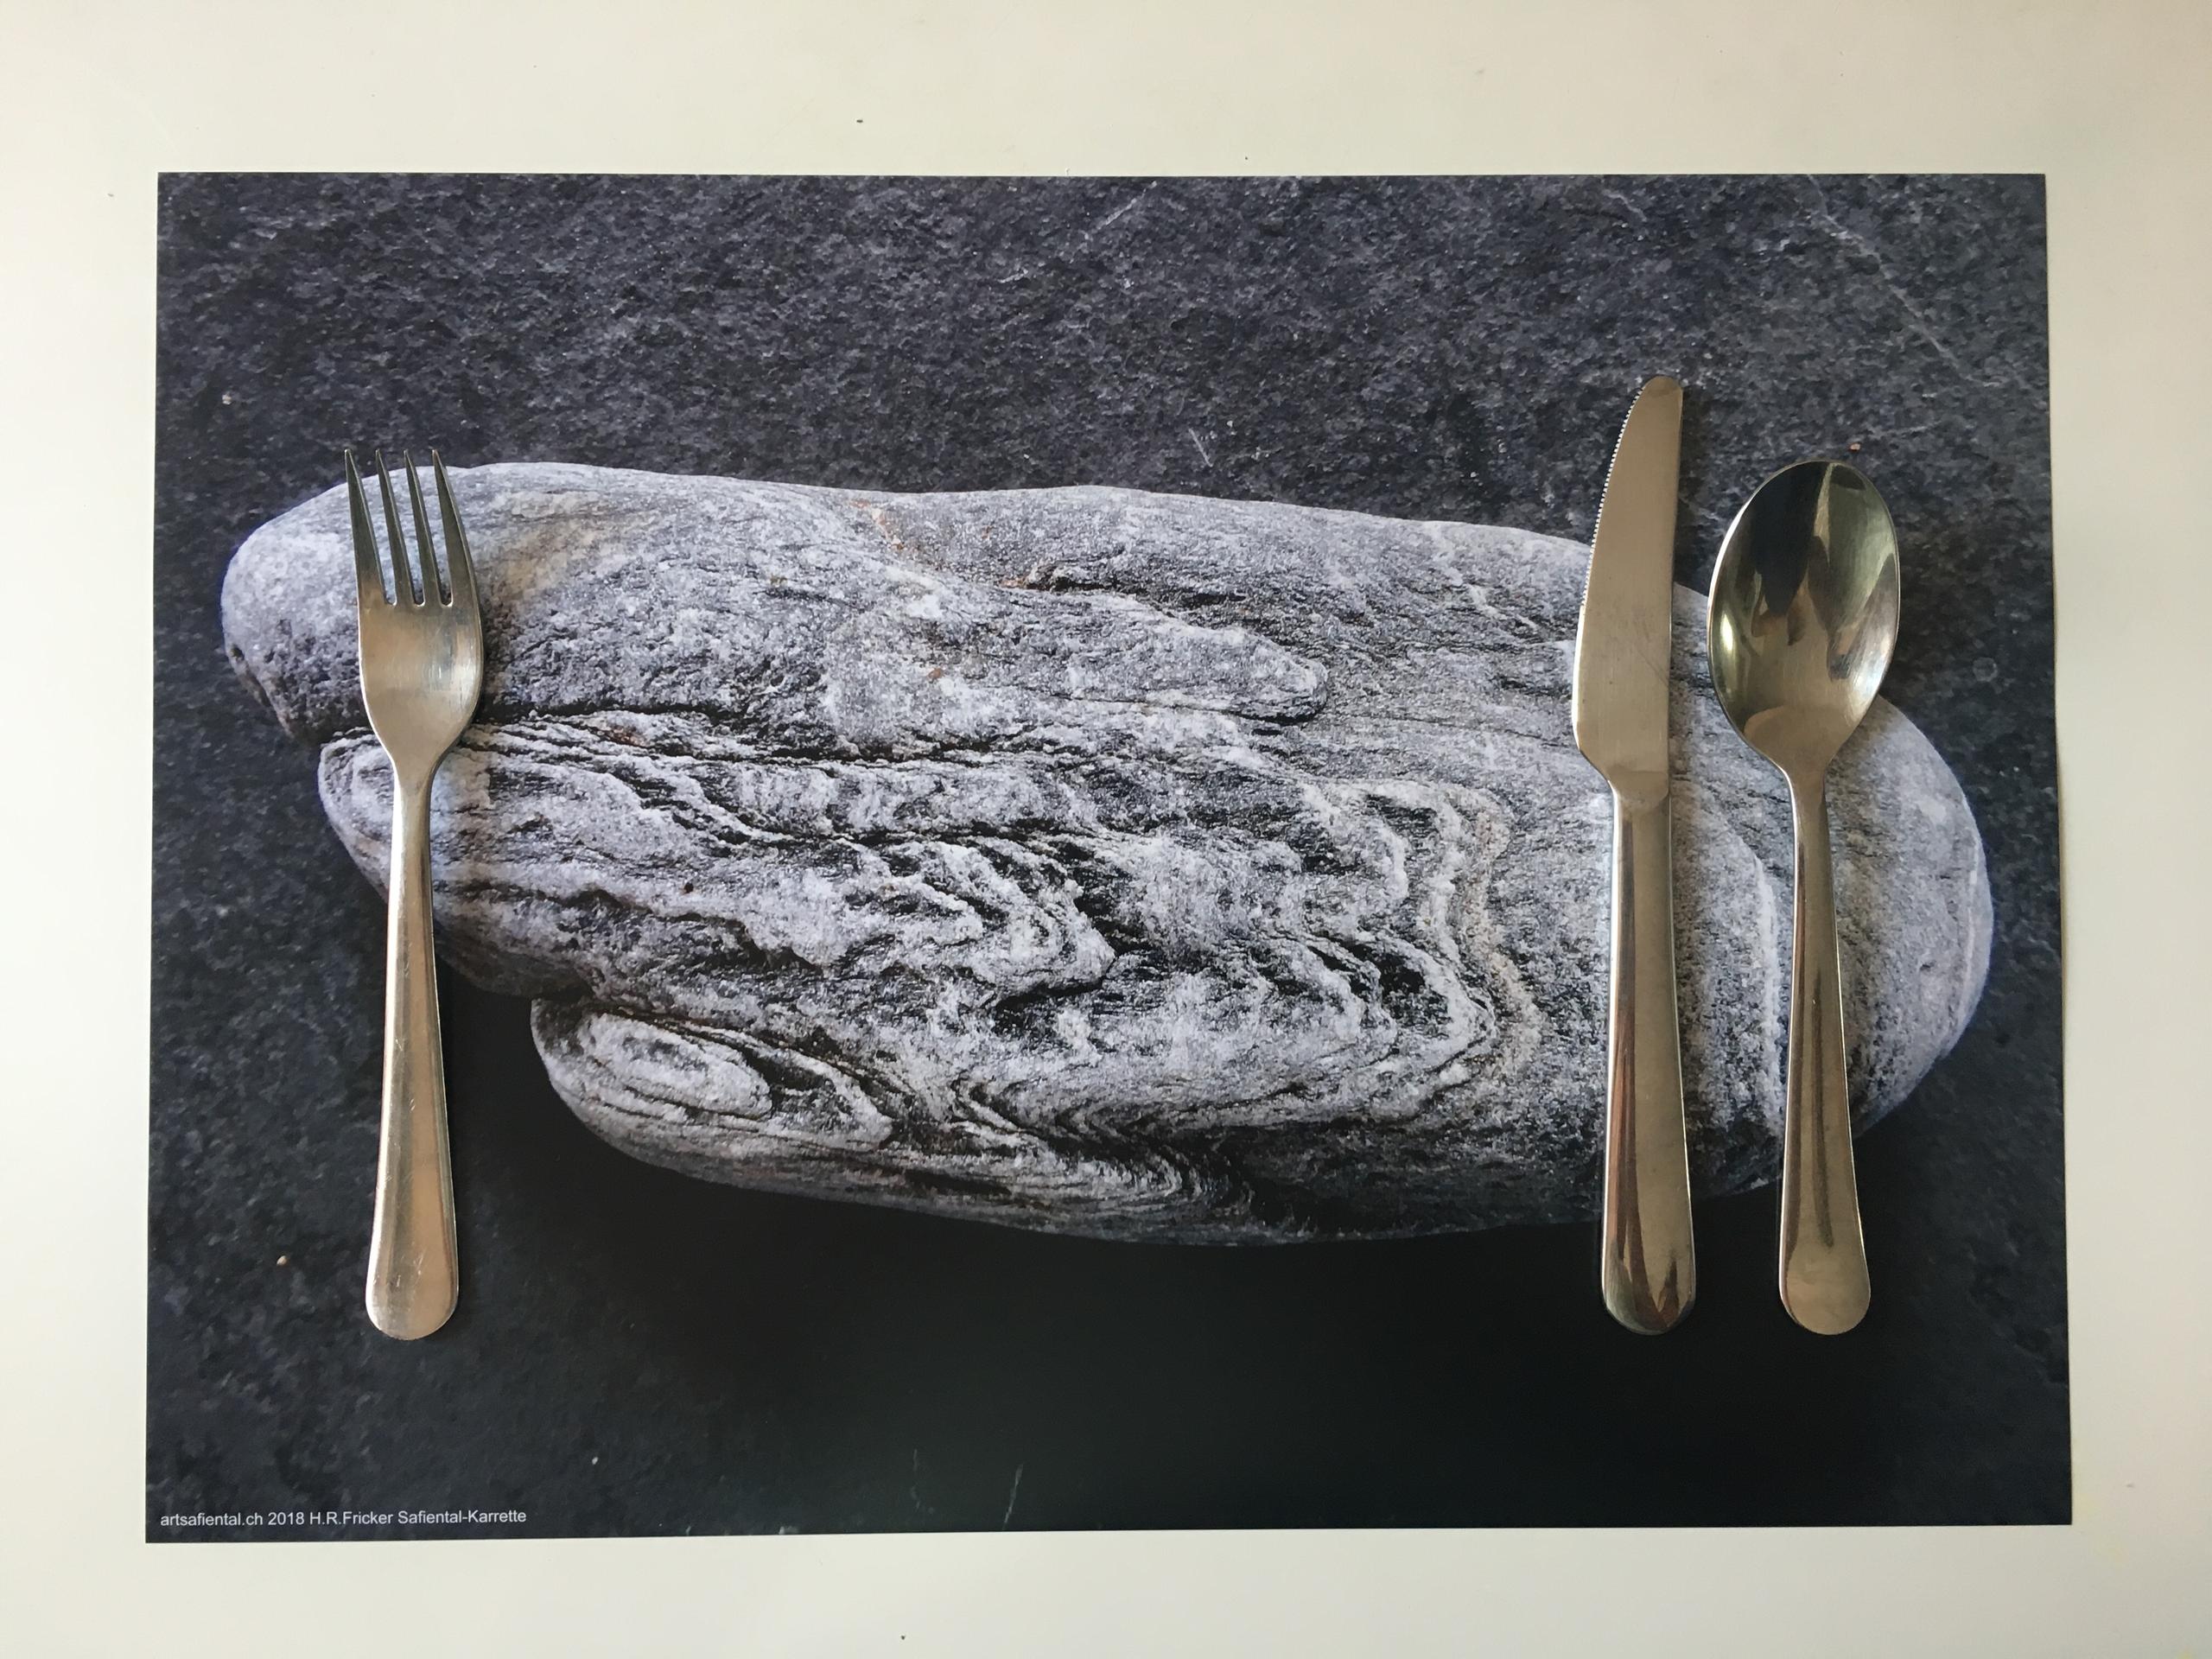 A stone on slate and a knife, fork and spoon.